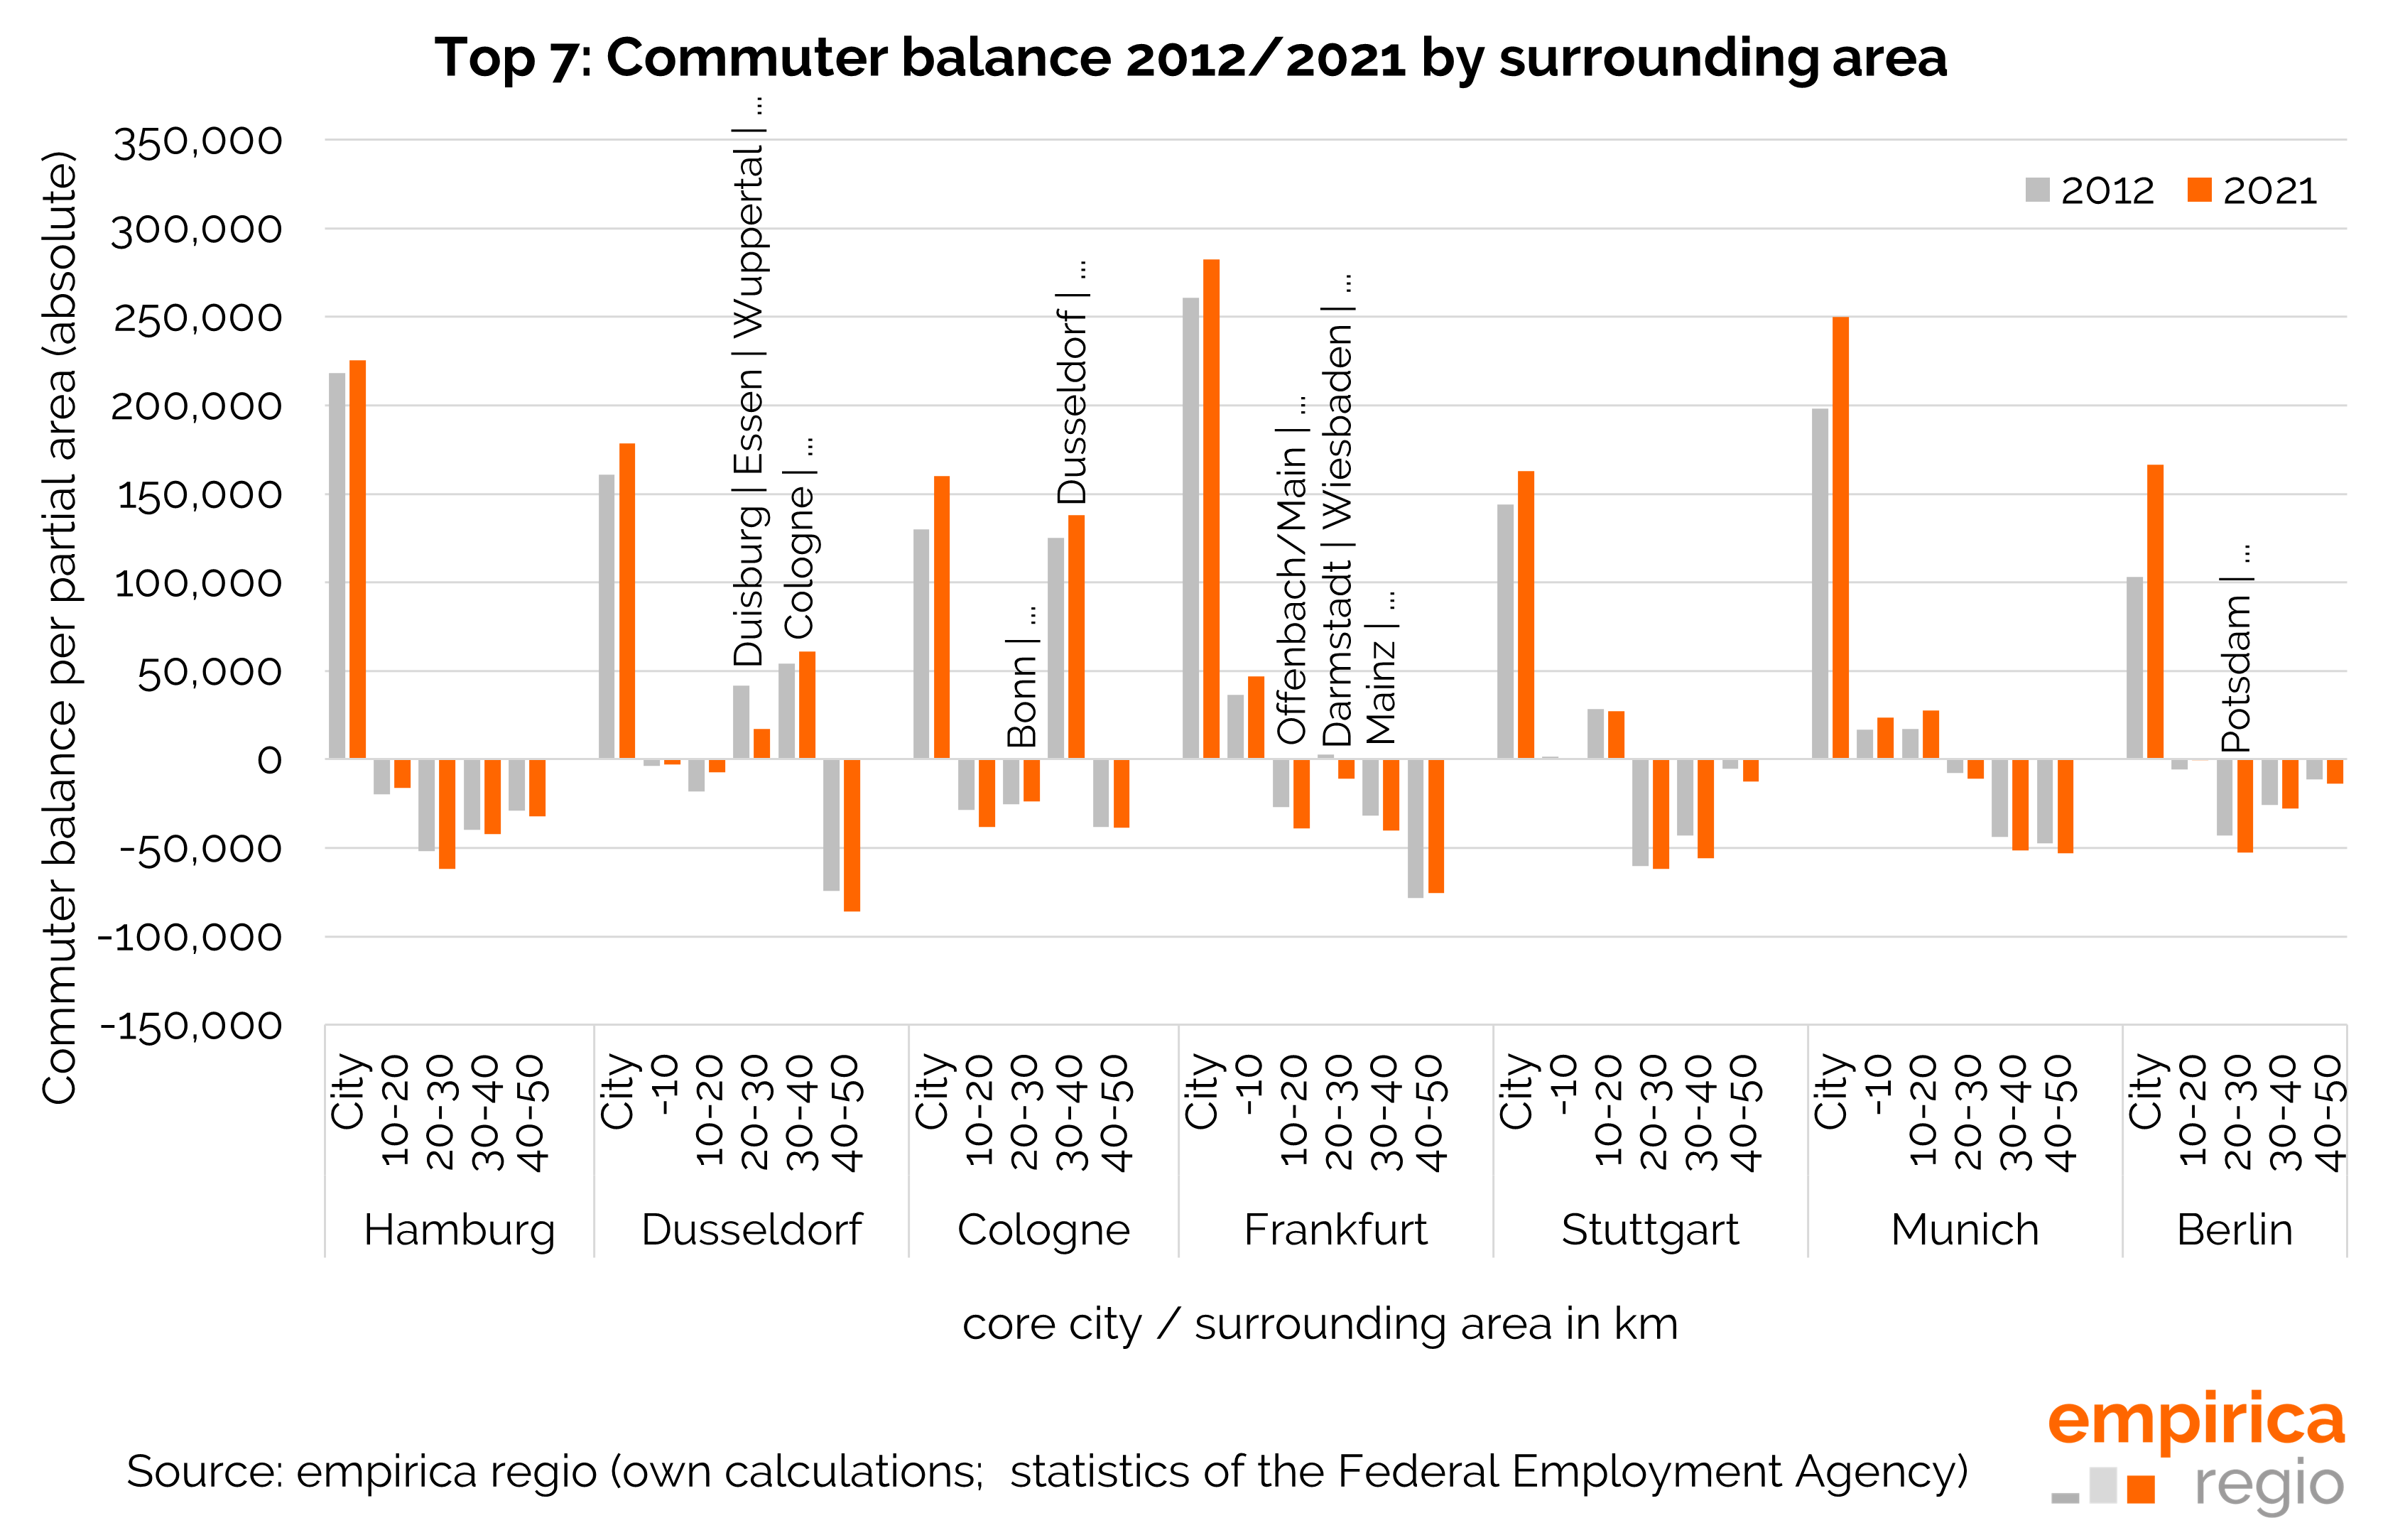 Top 7: Commuter balance 2012 and 2021 by surrounding areas in comparison